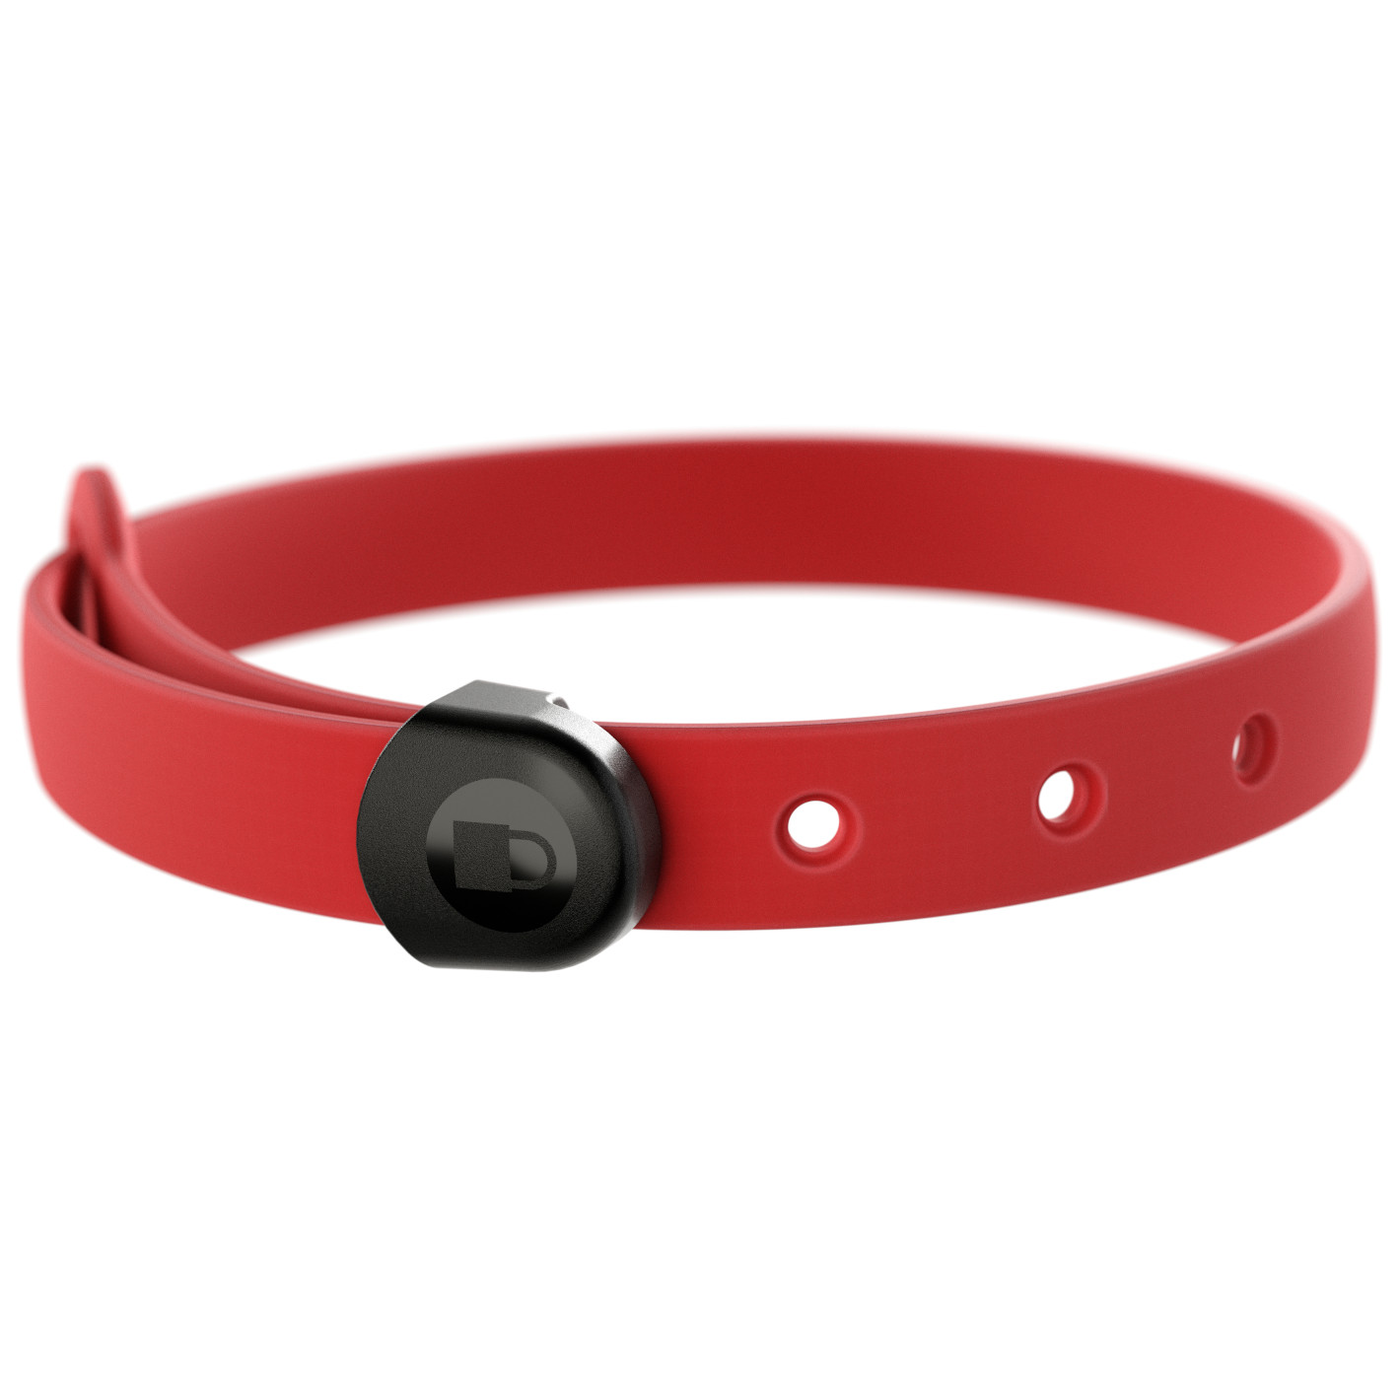 Toy dog red collar with locking mechanism